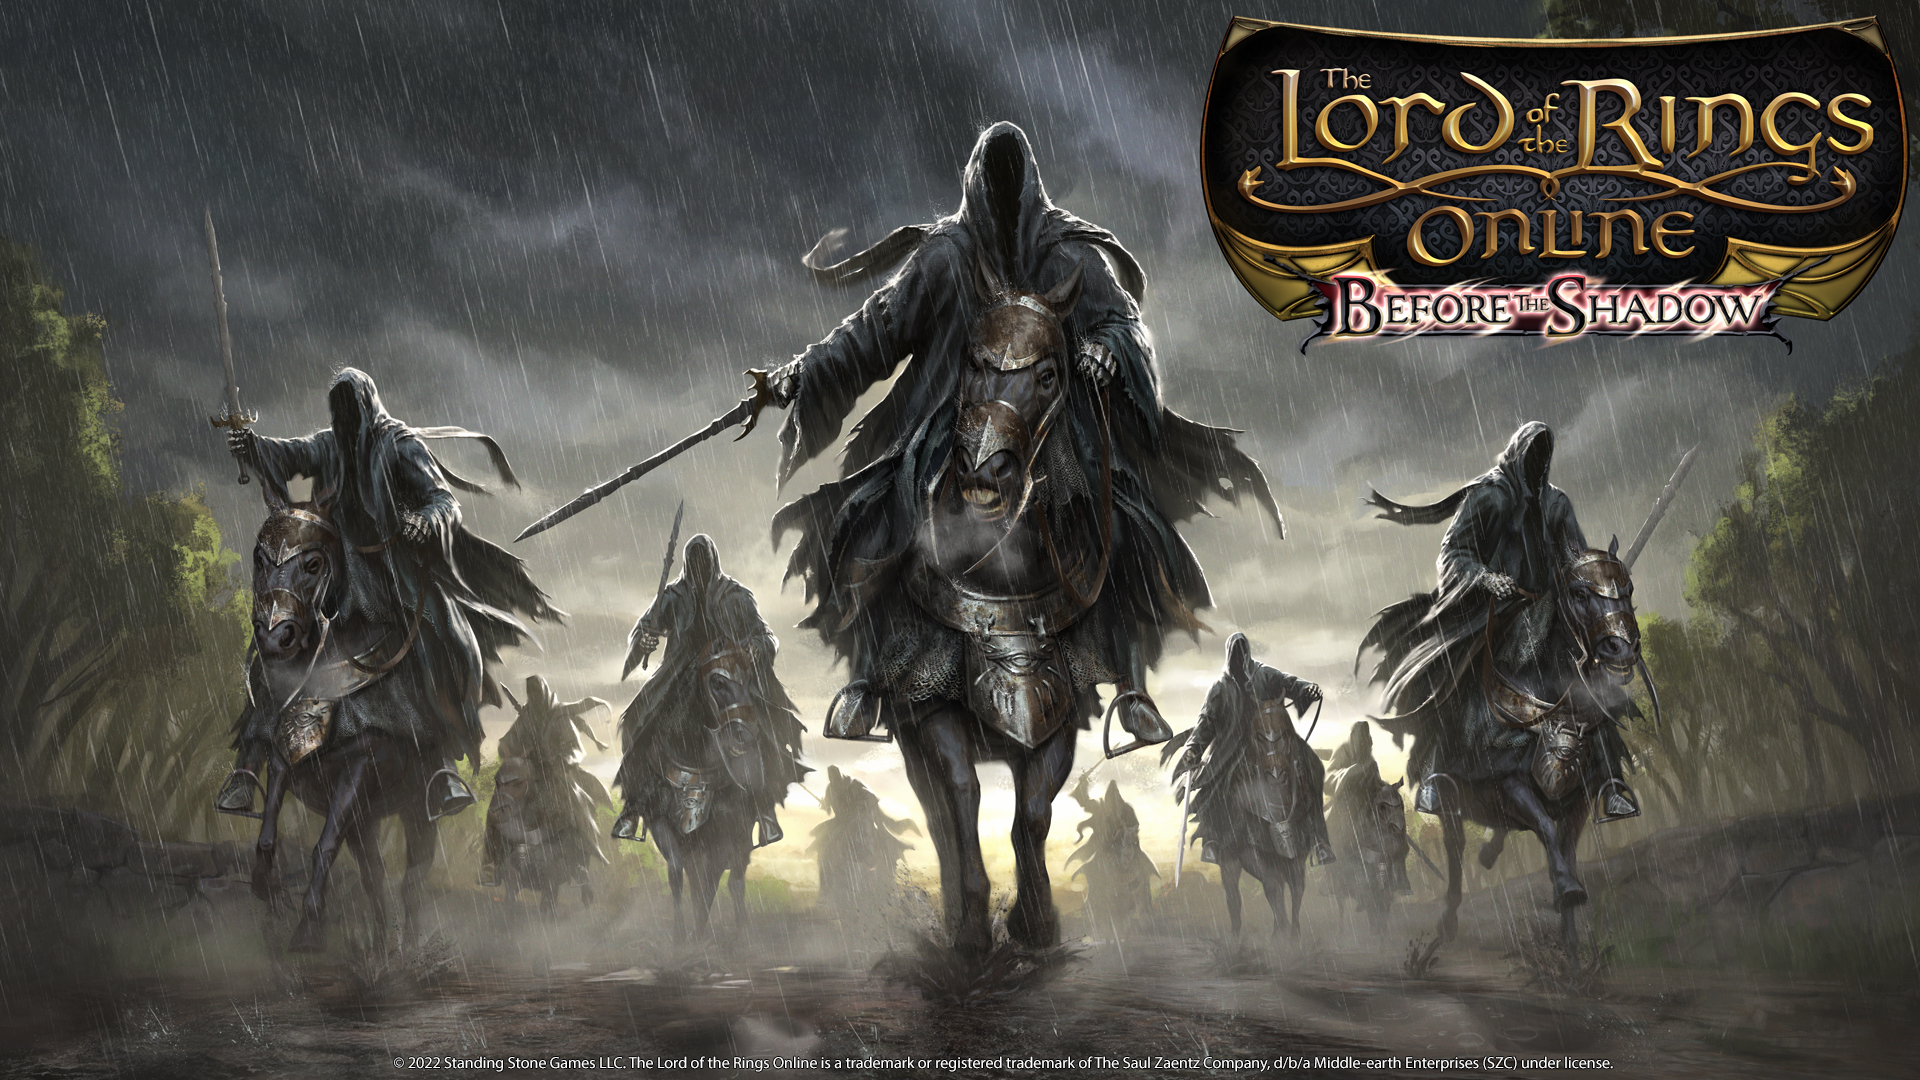 What's your favorite Lord of the Rings game besides Shadow of